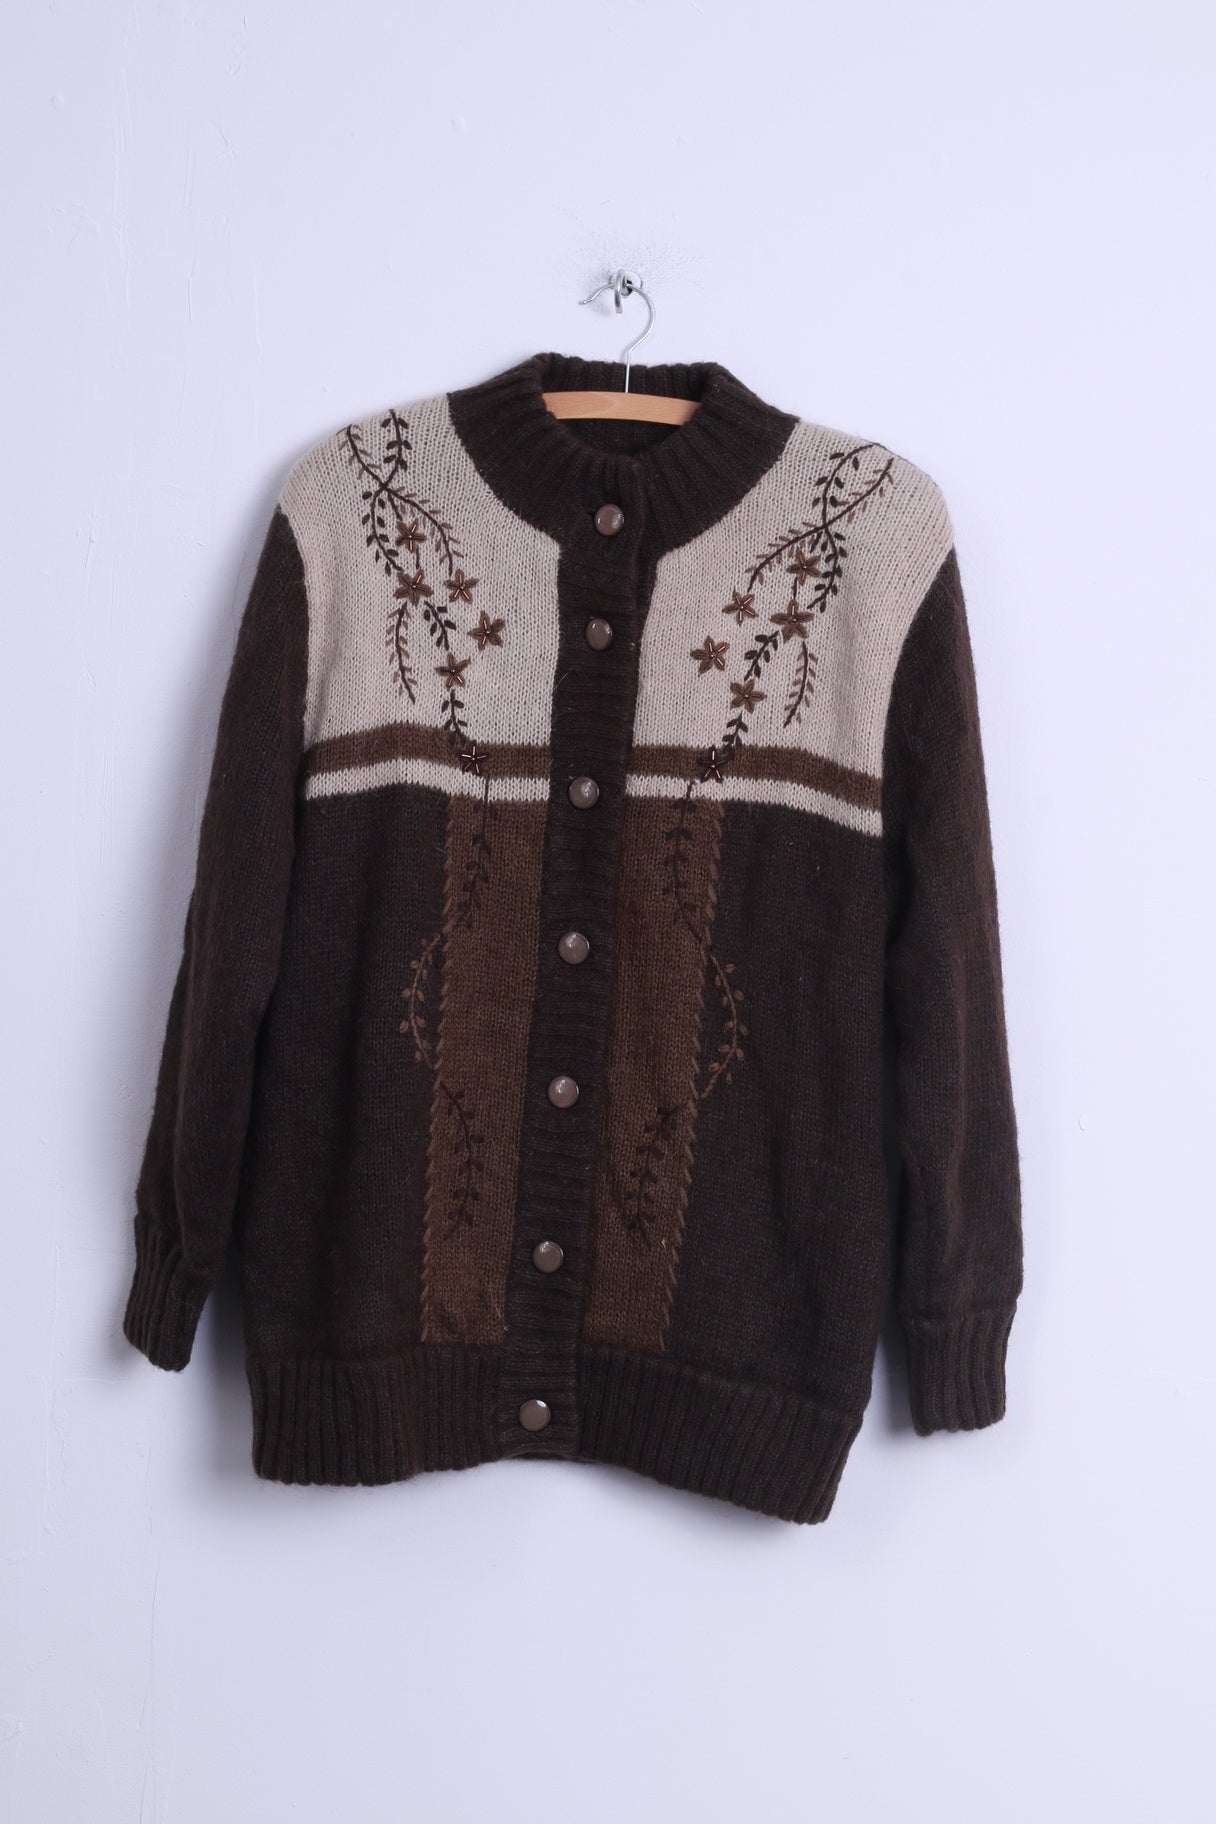 Affections Womens M/L Cardigan Jacket Brown Wool Blended Shoulder Pads Retro Sweater